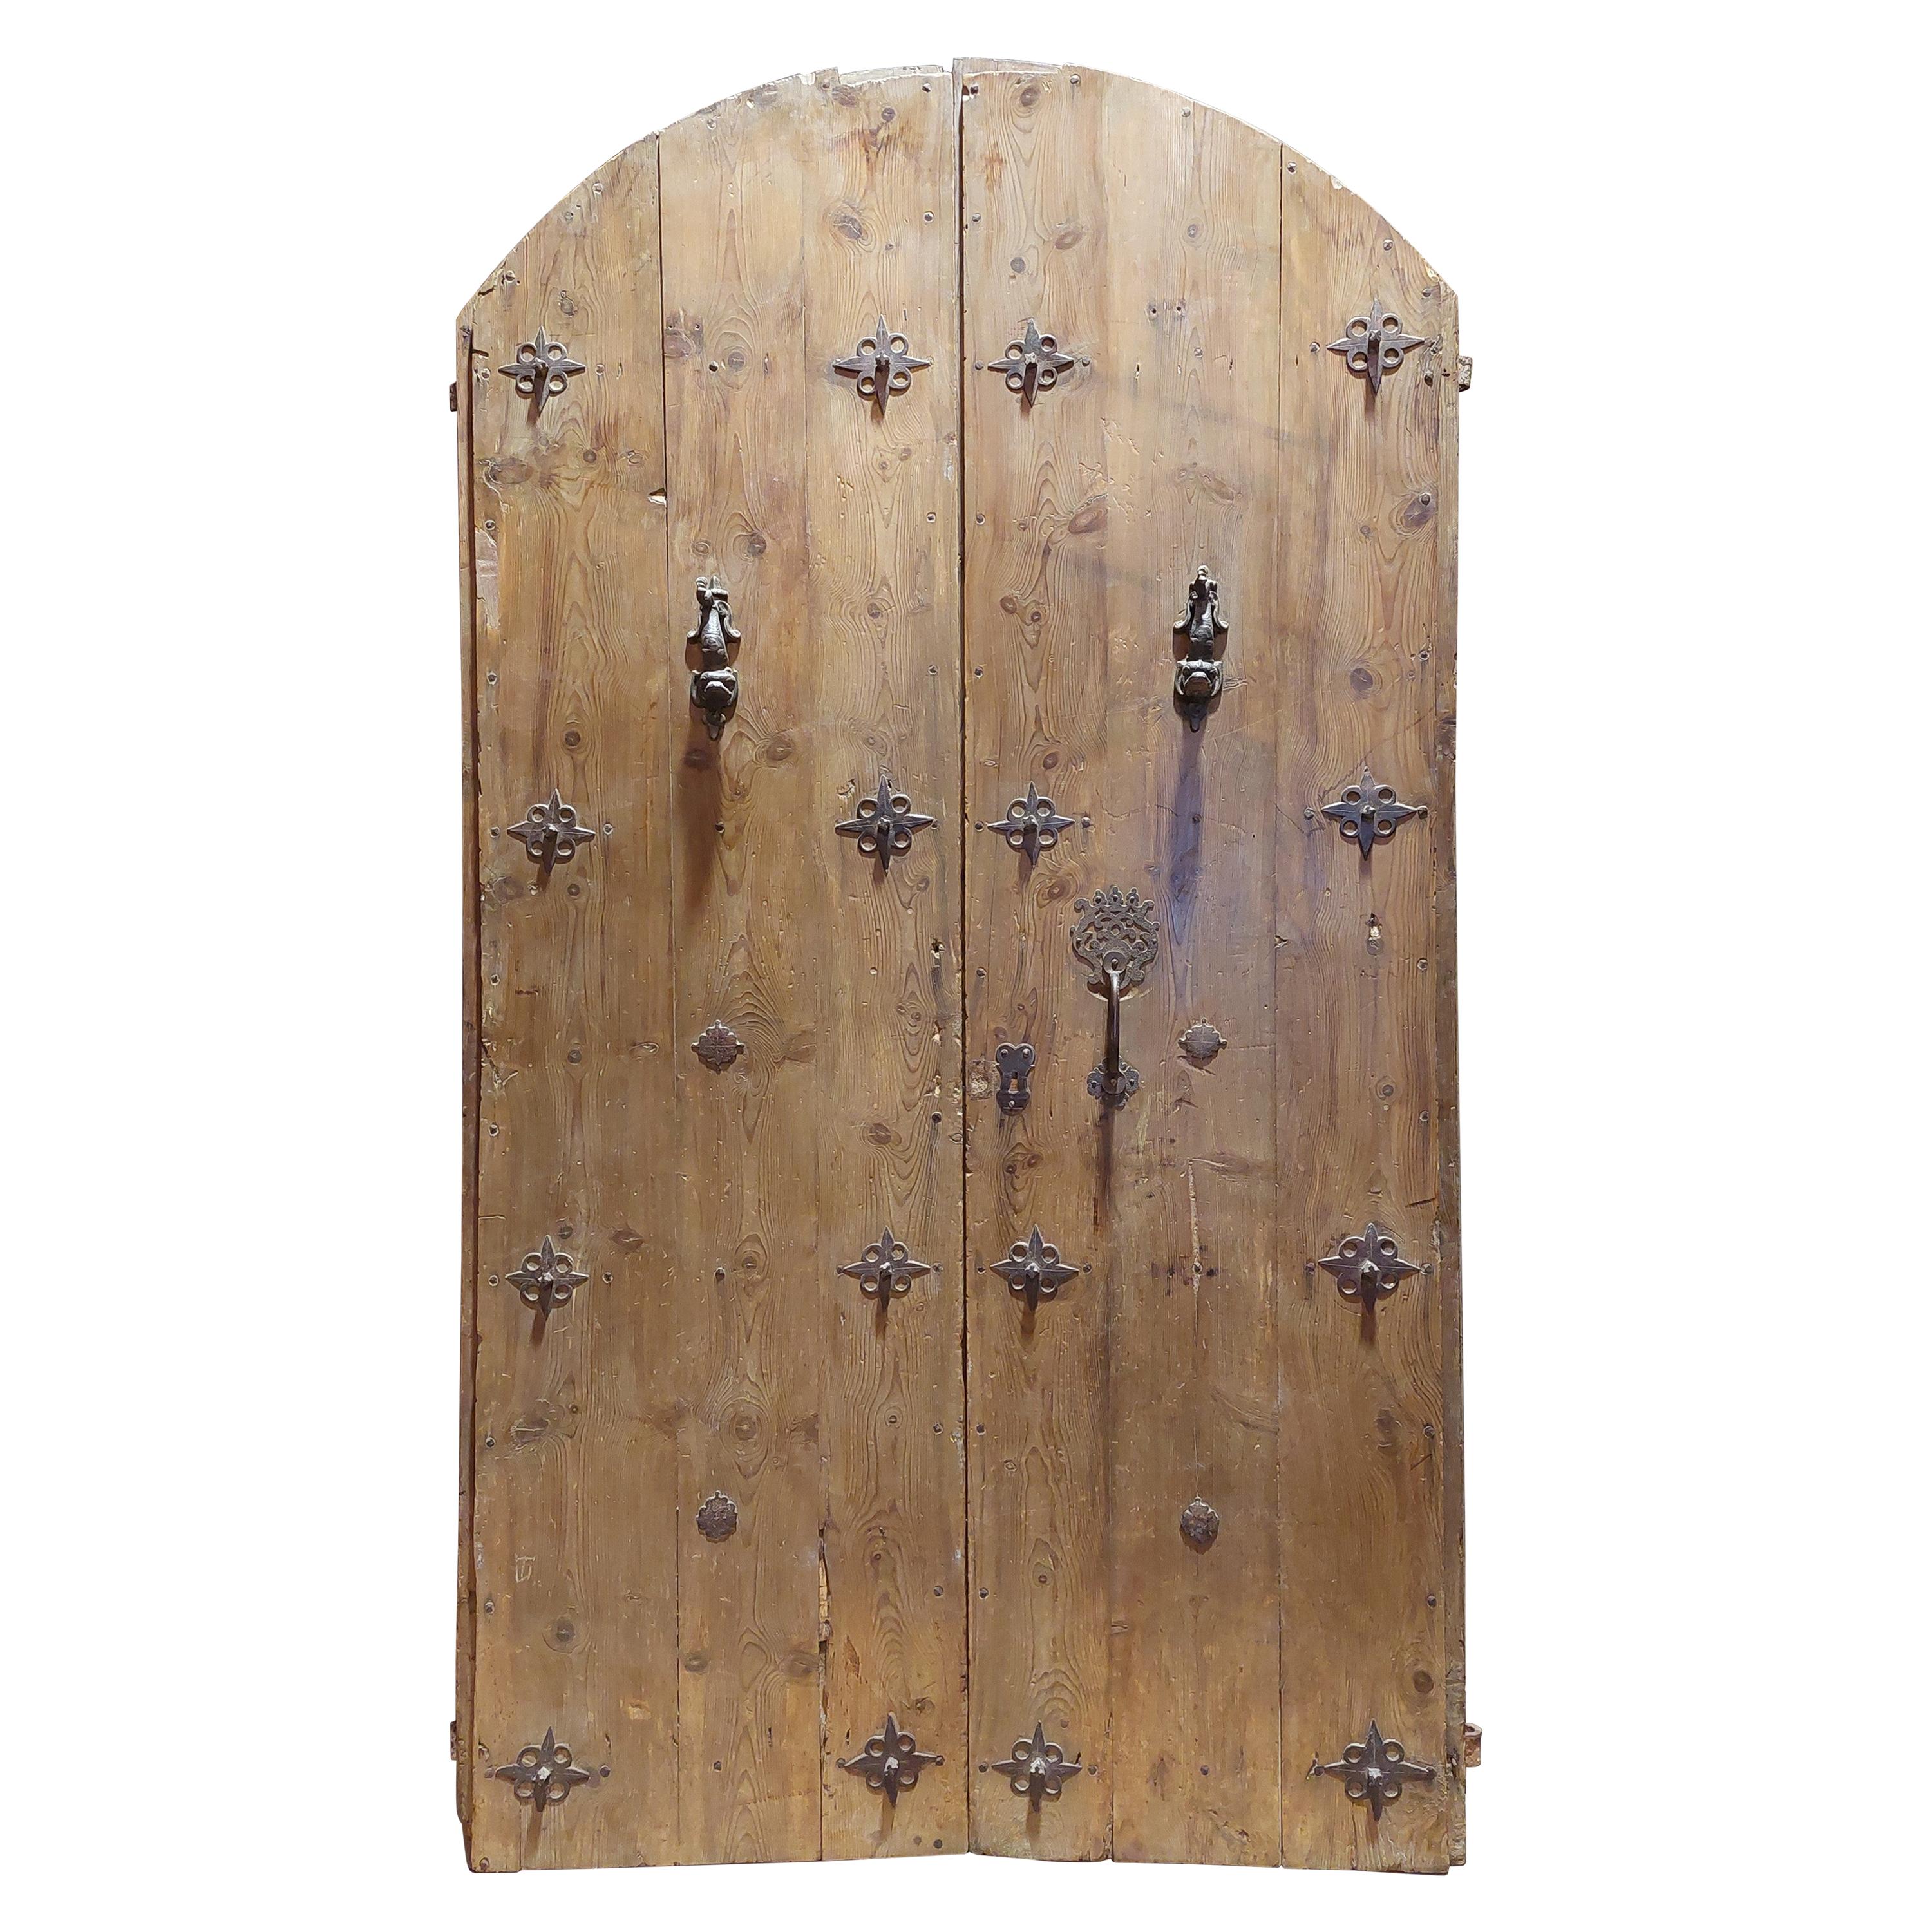 Antique Entrance Door in Larch, Rounded with Original Irons and Studs, '700